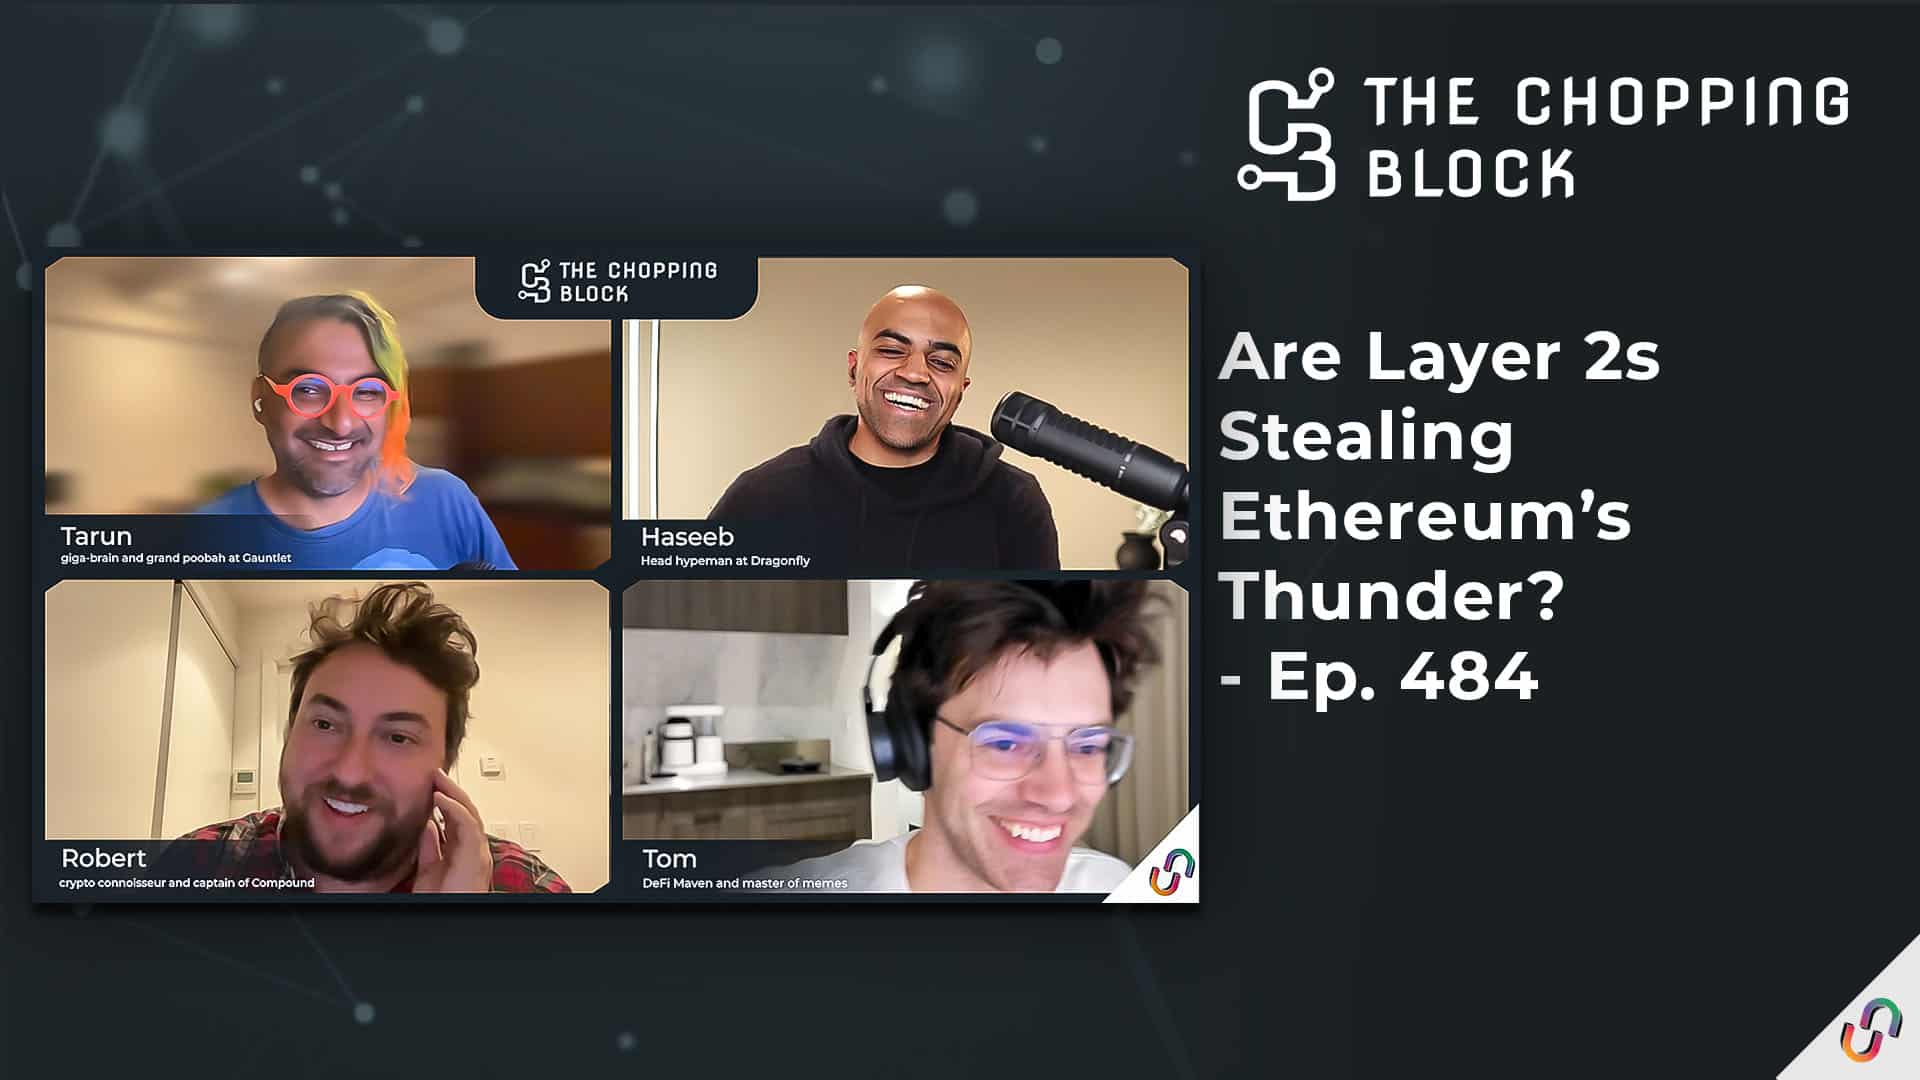 The Chopping Block: Are Layer 2s Stealing Ethereum’s Thunder? - Ep. 484